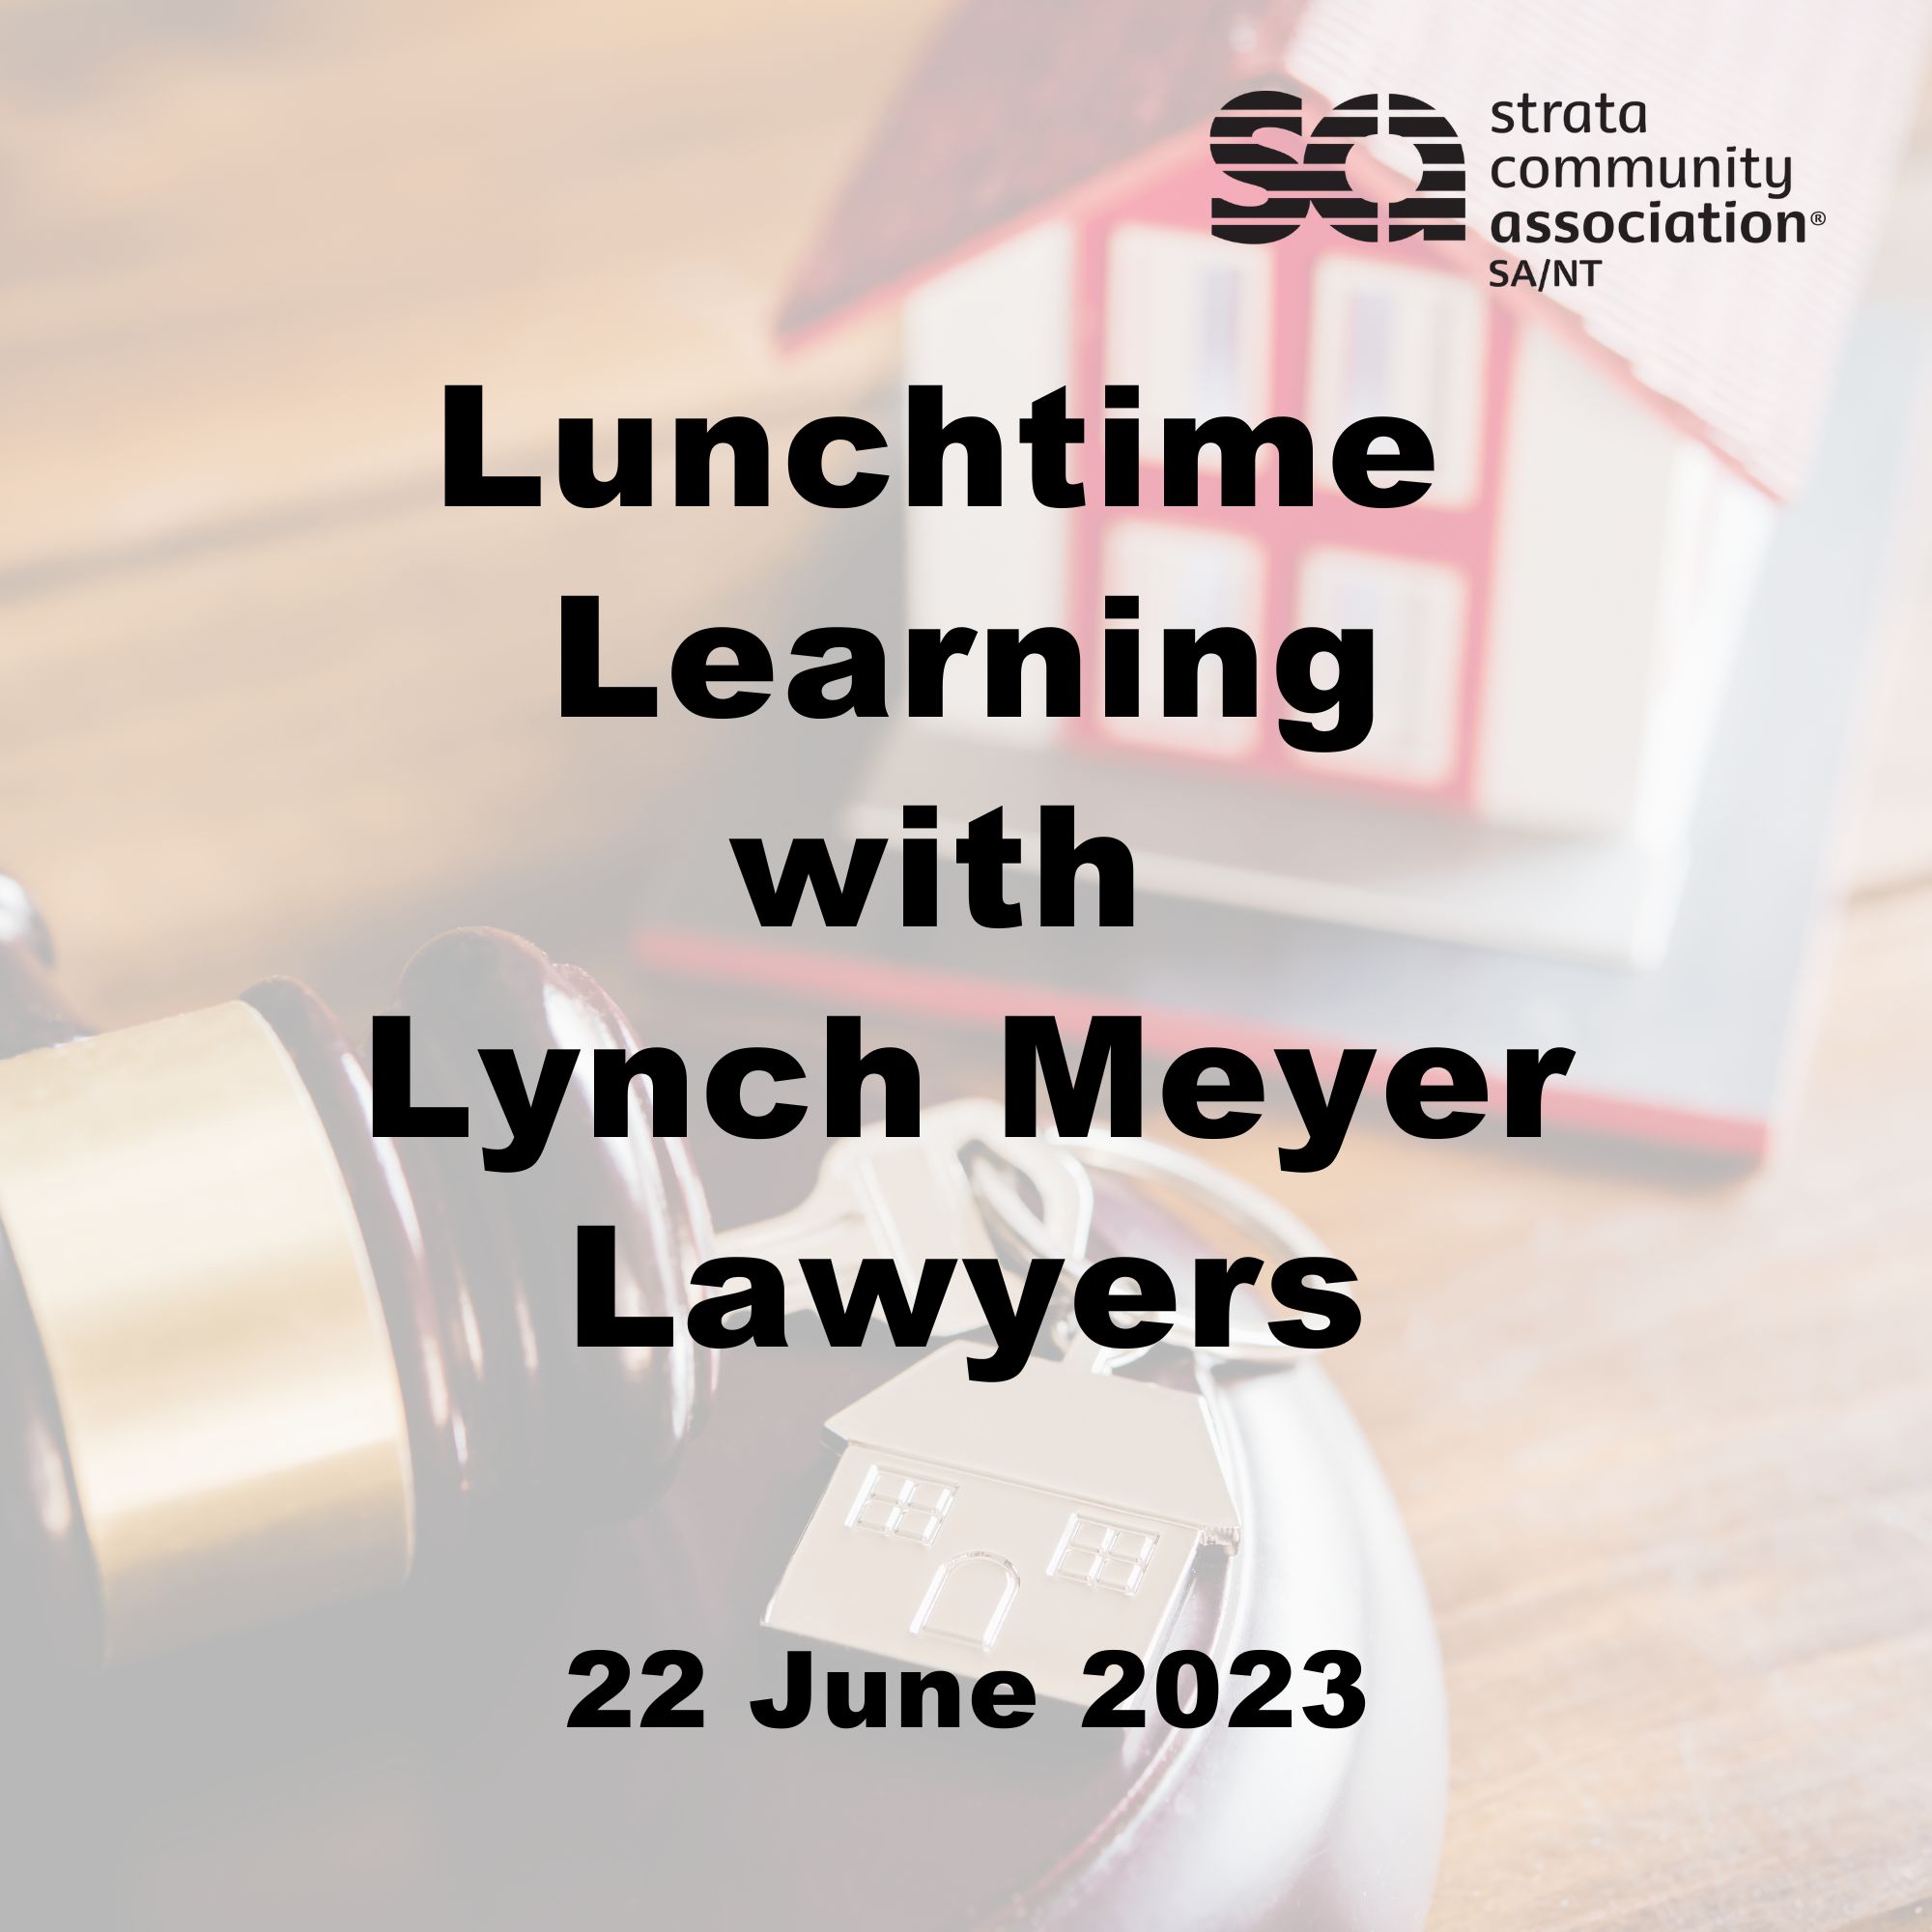 SCA (SA/NT) Lunchtime Learning with Lynch Meyer Lawyers